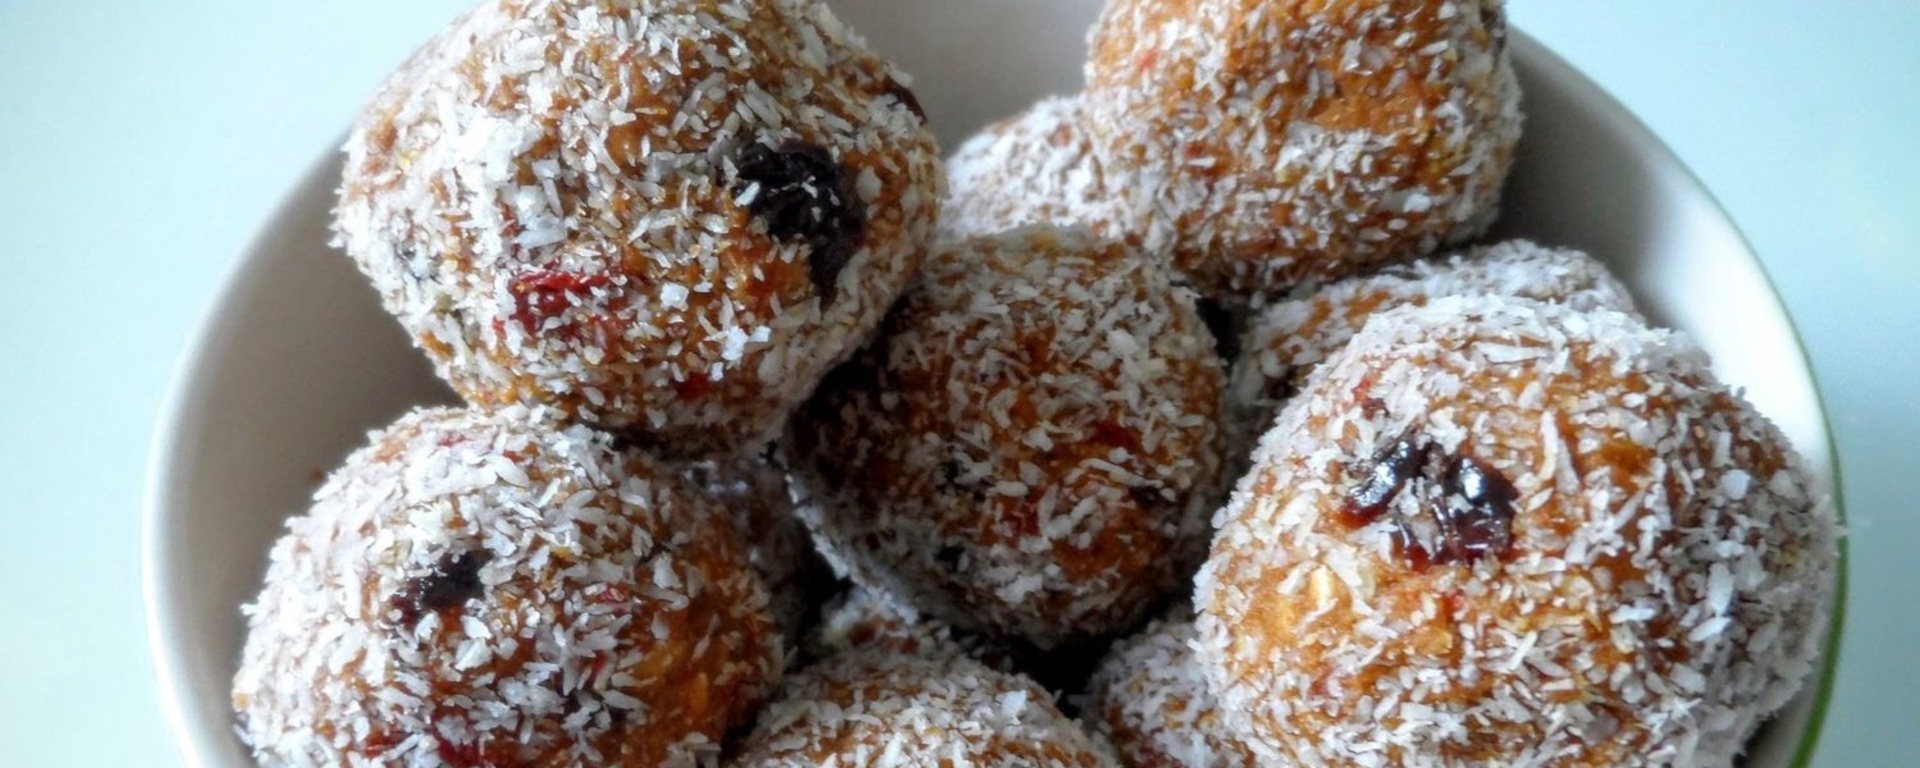 LuvMyRecipe.com - Energy Balls with Almonds, Cacao and Coconut Cream Featured